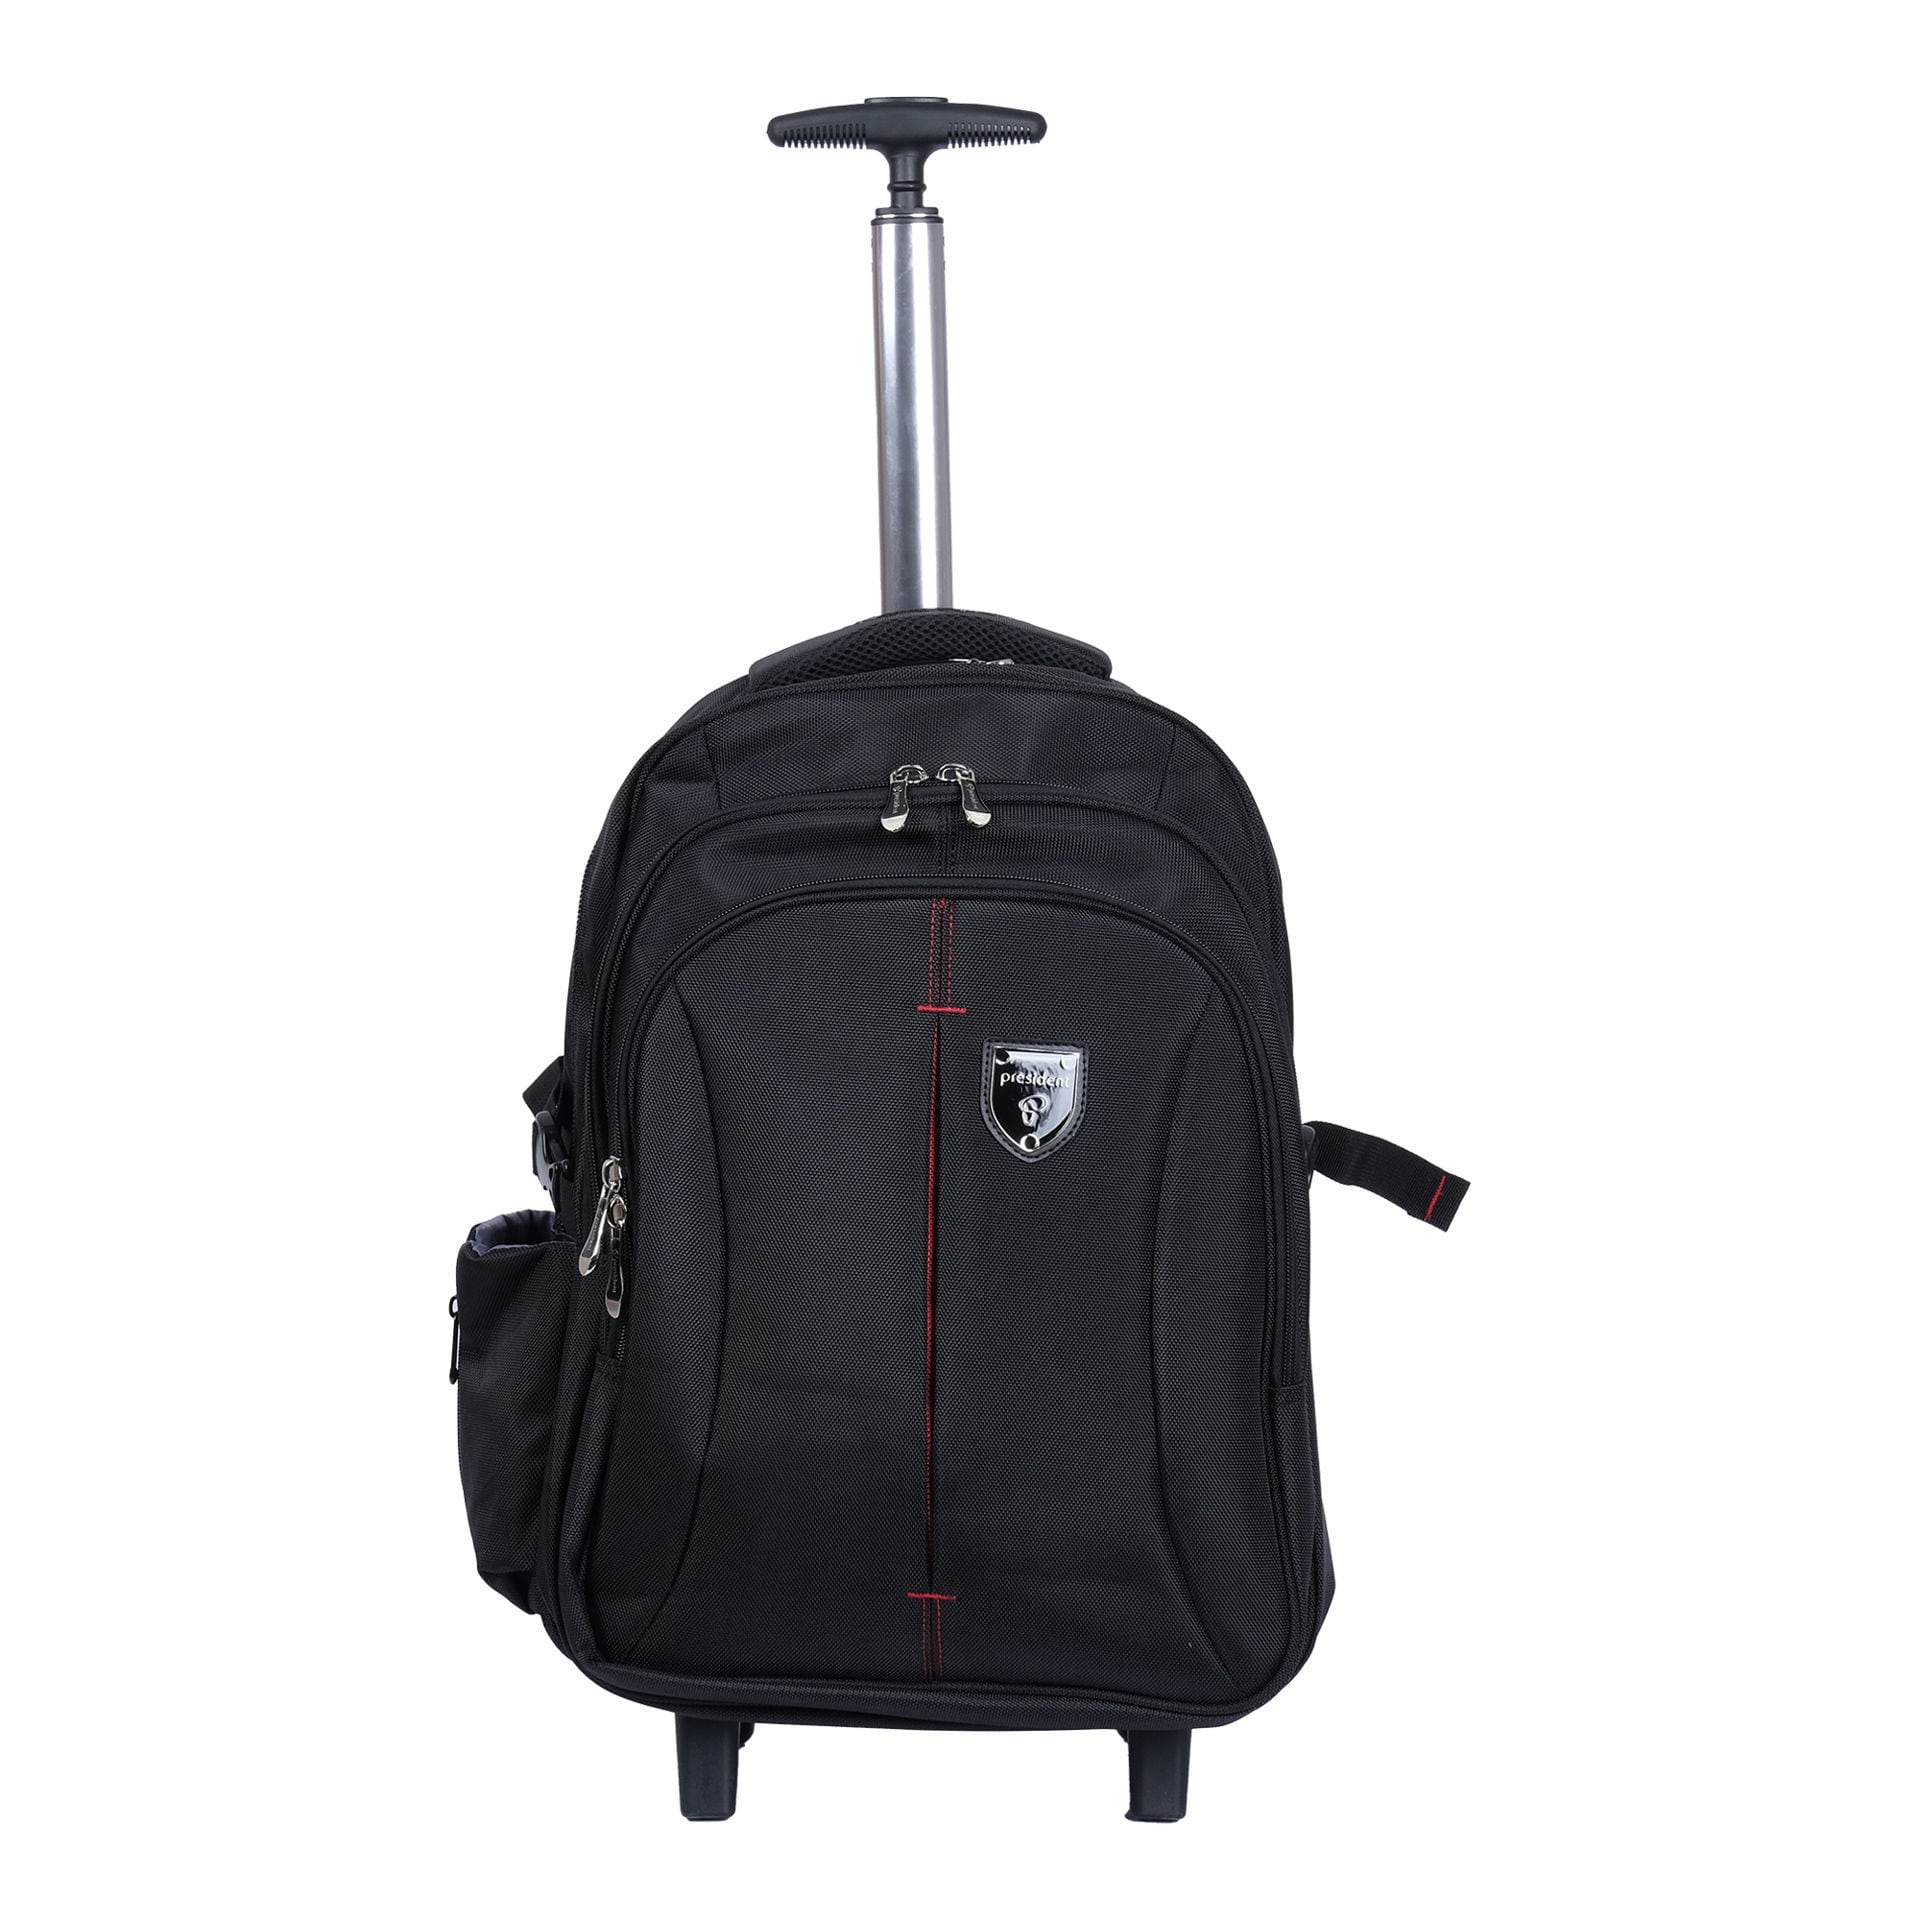 Men's Travel Bags Online: Low Price Offer on Travel Bags for Men - AJIO